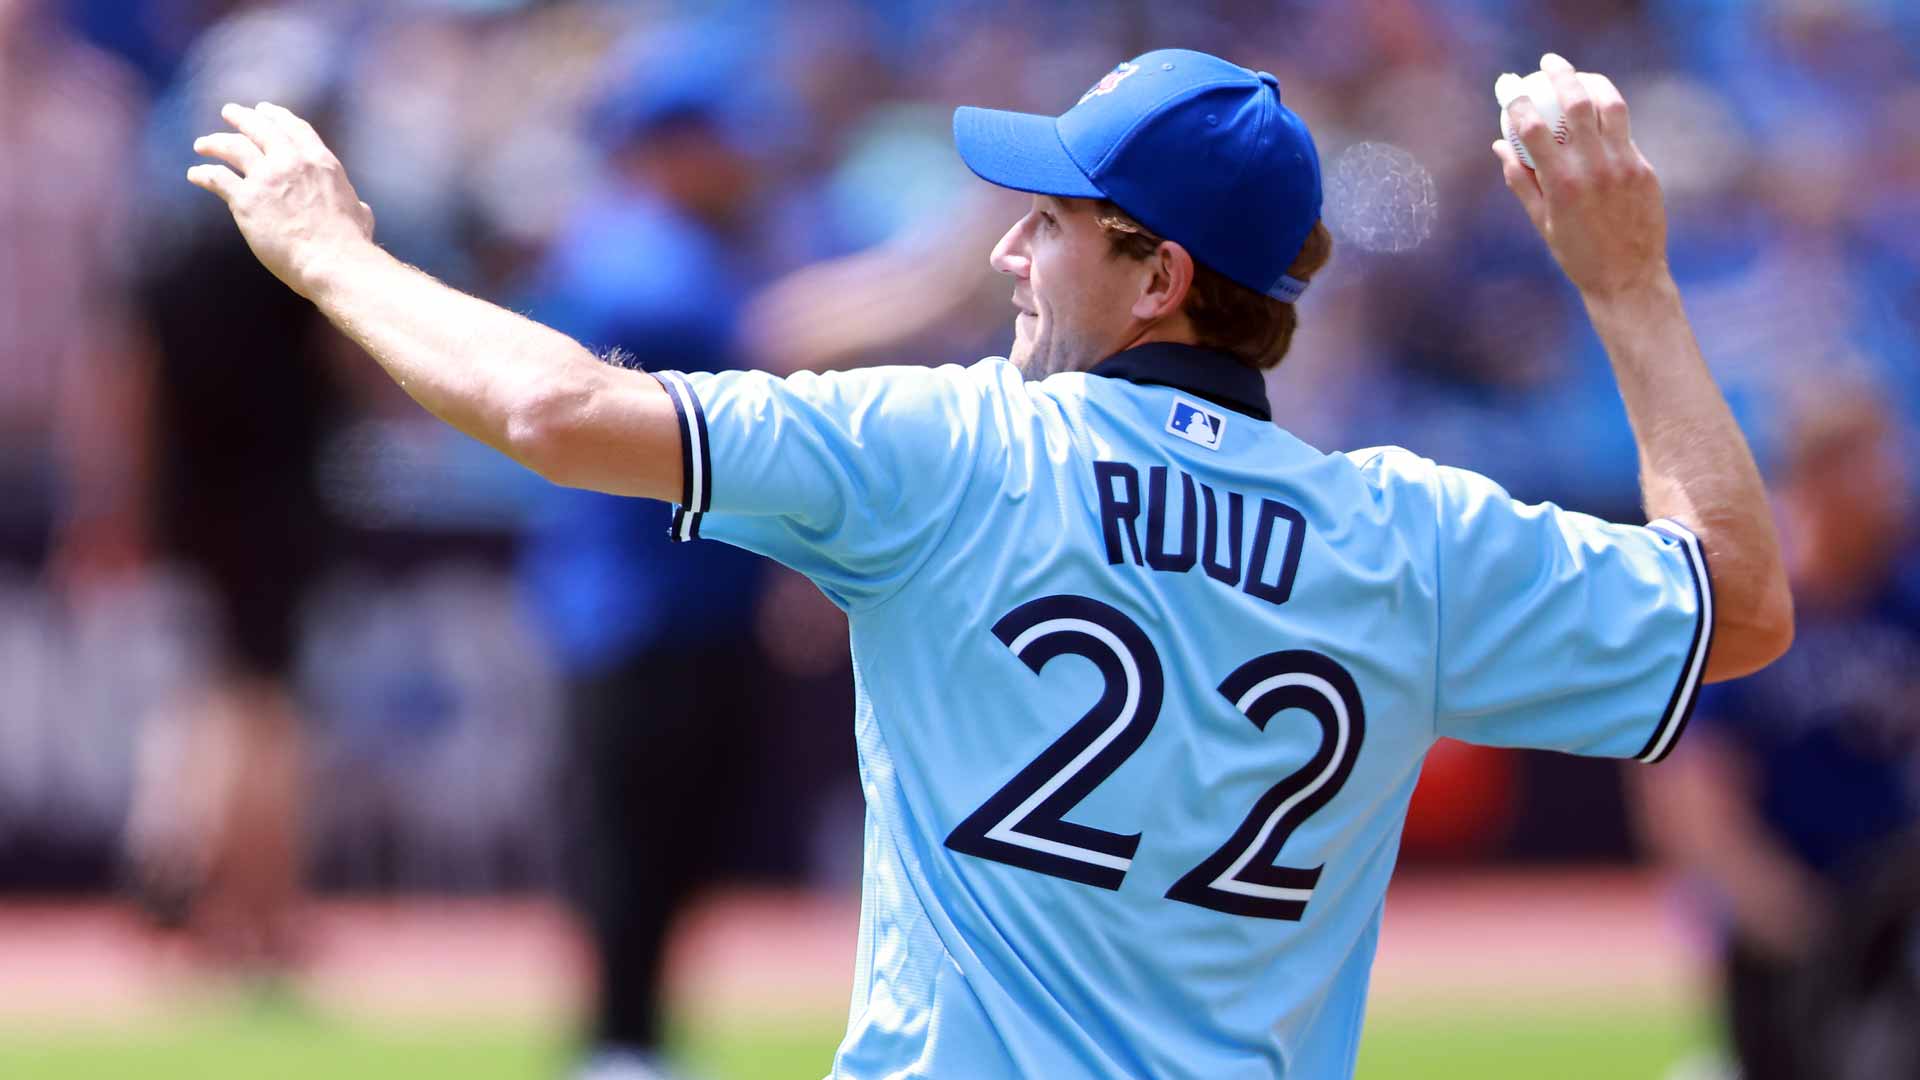 Casper Ruud delivers the ceremonial first pitch at Thursday's Toronto Blue Jays game.